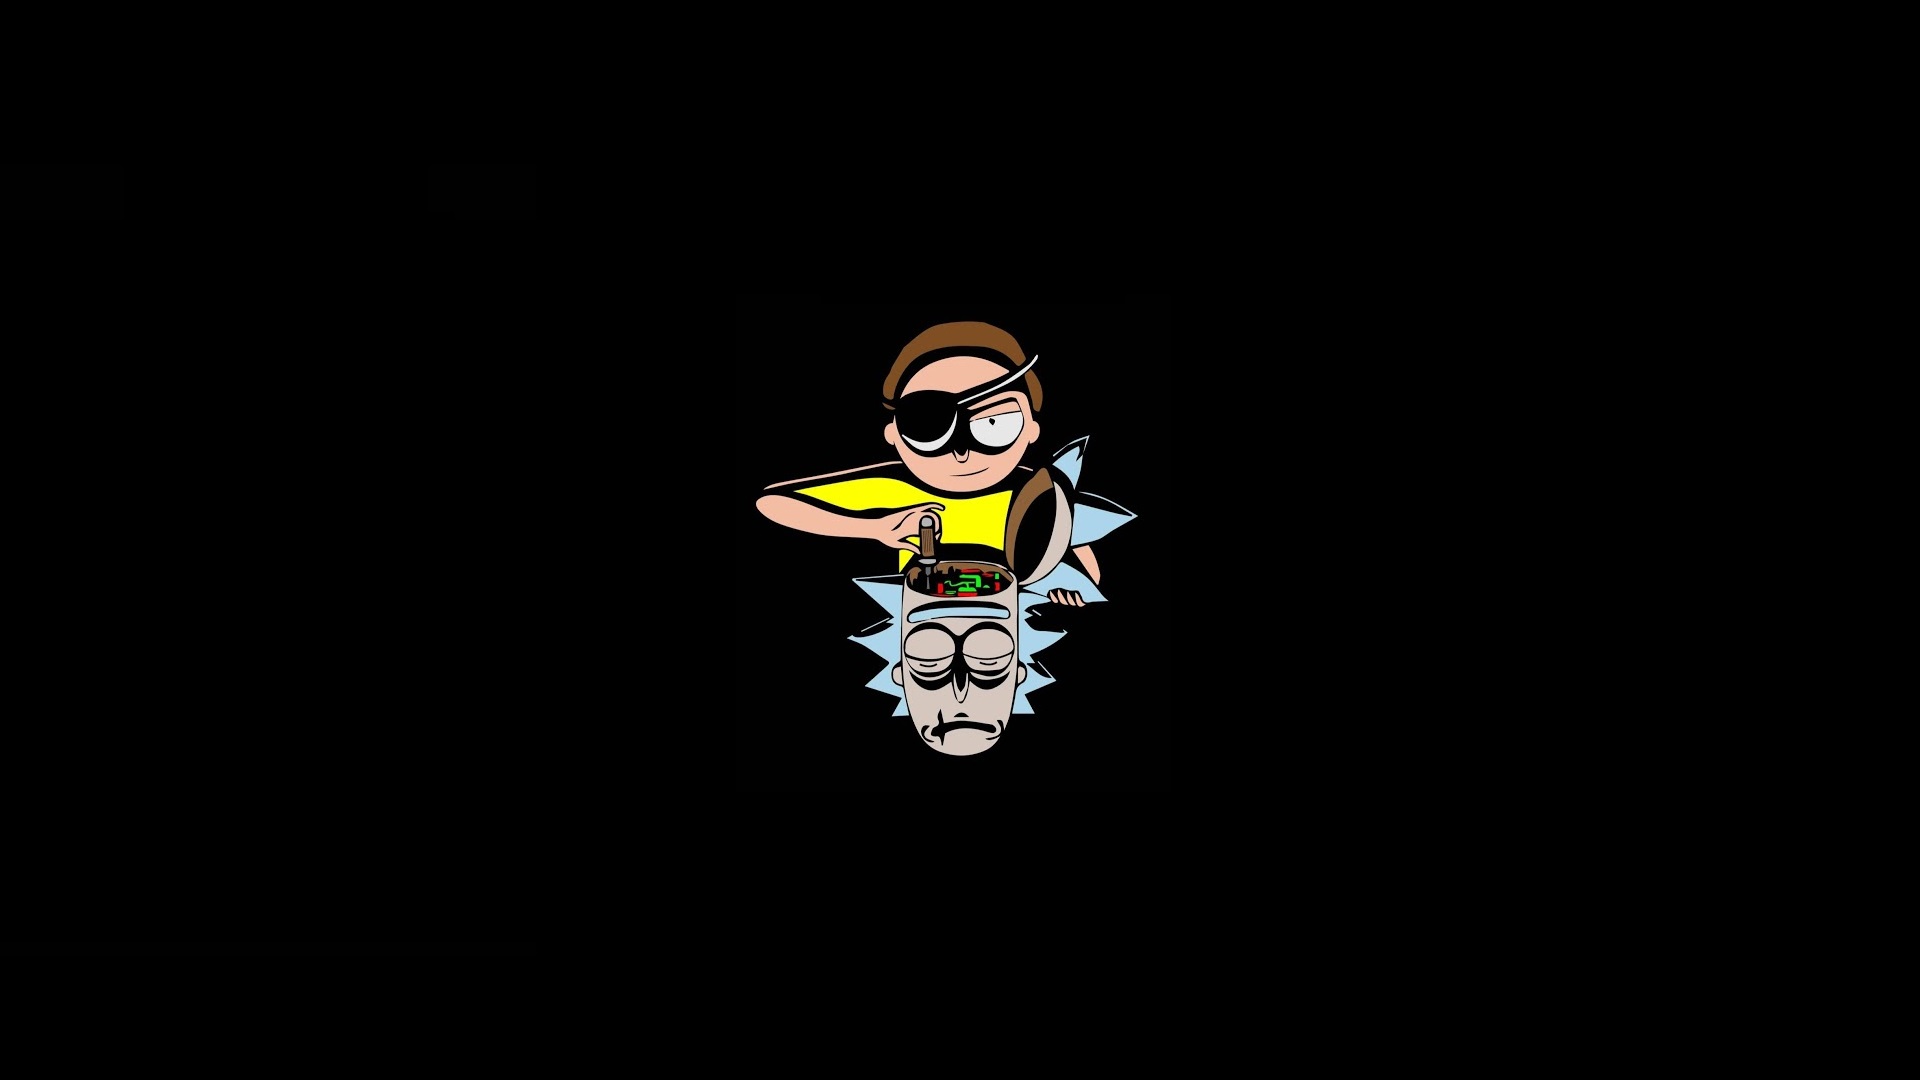 General 1920x1080 Rick and Morty eyepatches Morty Smith androids simple background TV cartoon